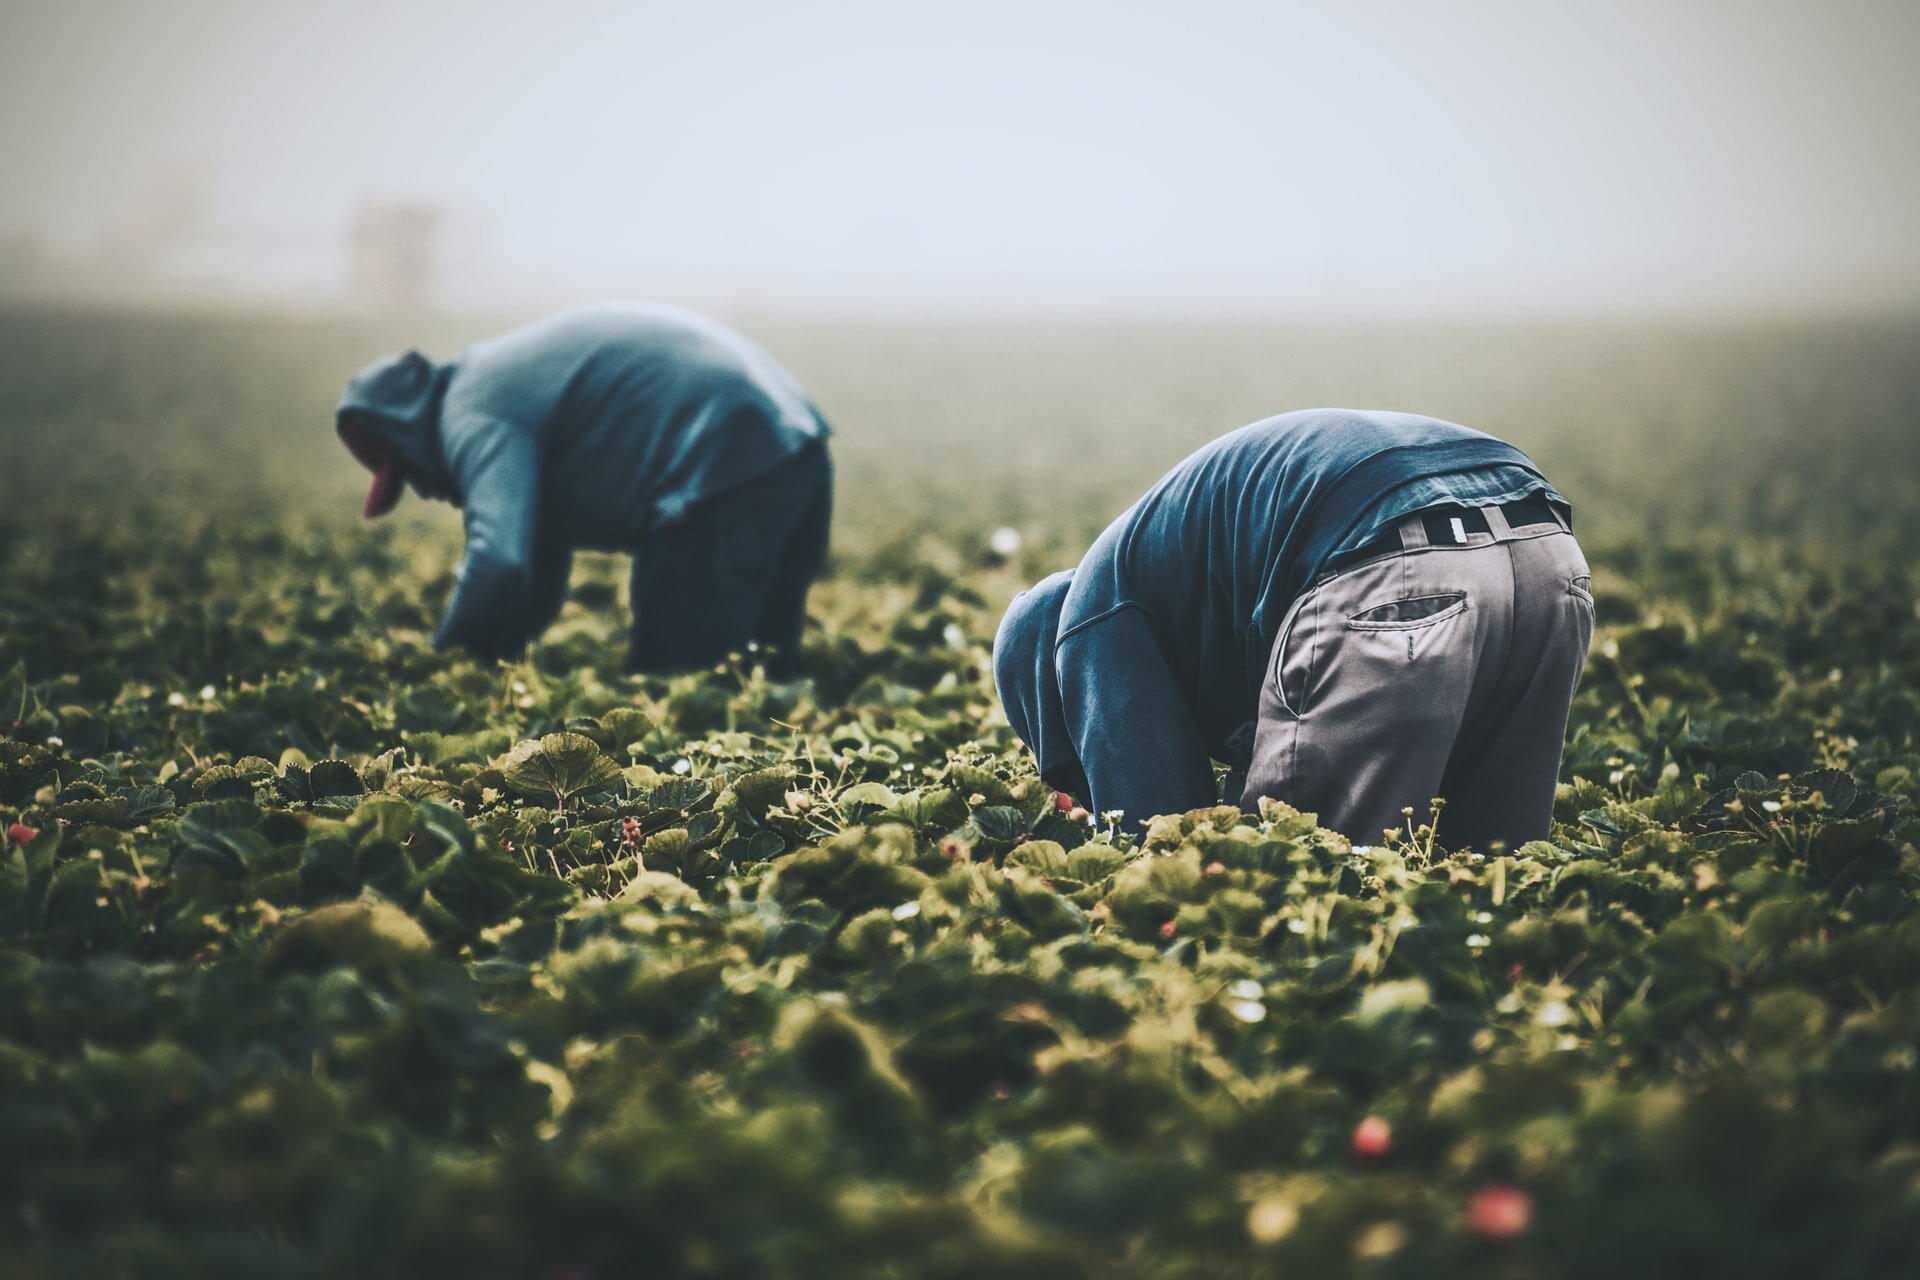 Image description: Two farmworkers wearing hats and sweatshirts bent over in a smoky field tending strawberries. Image credit: Tim Mossholder